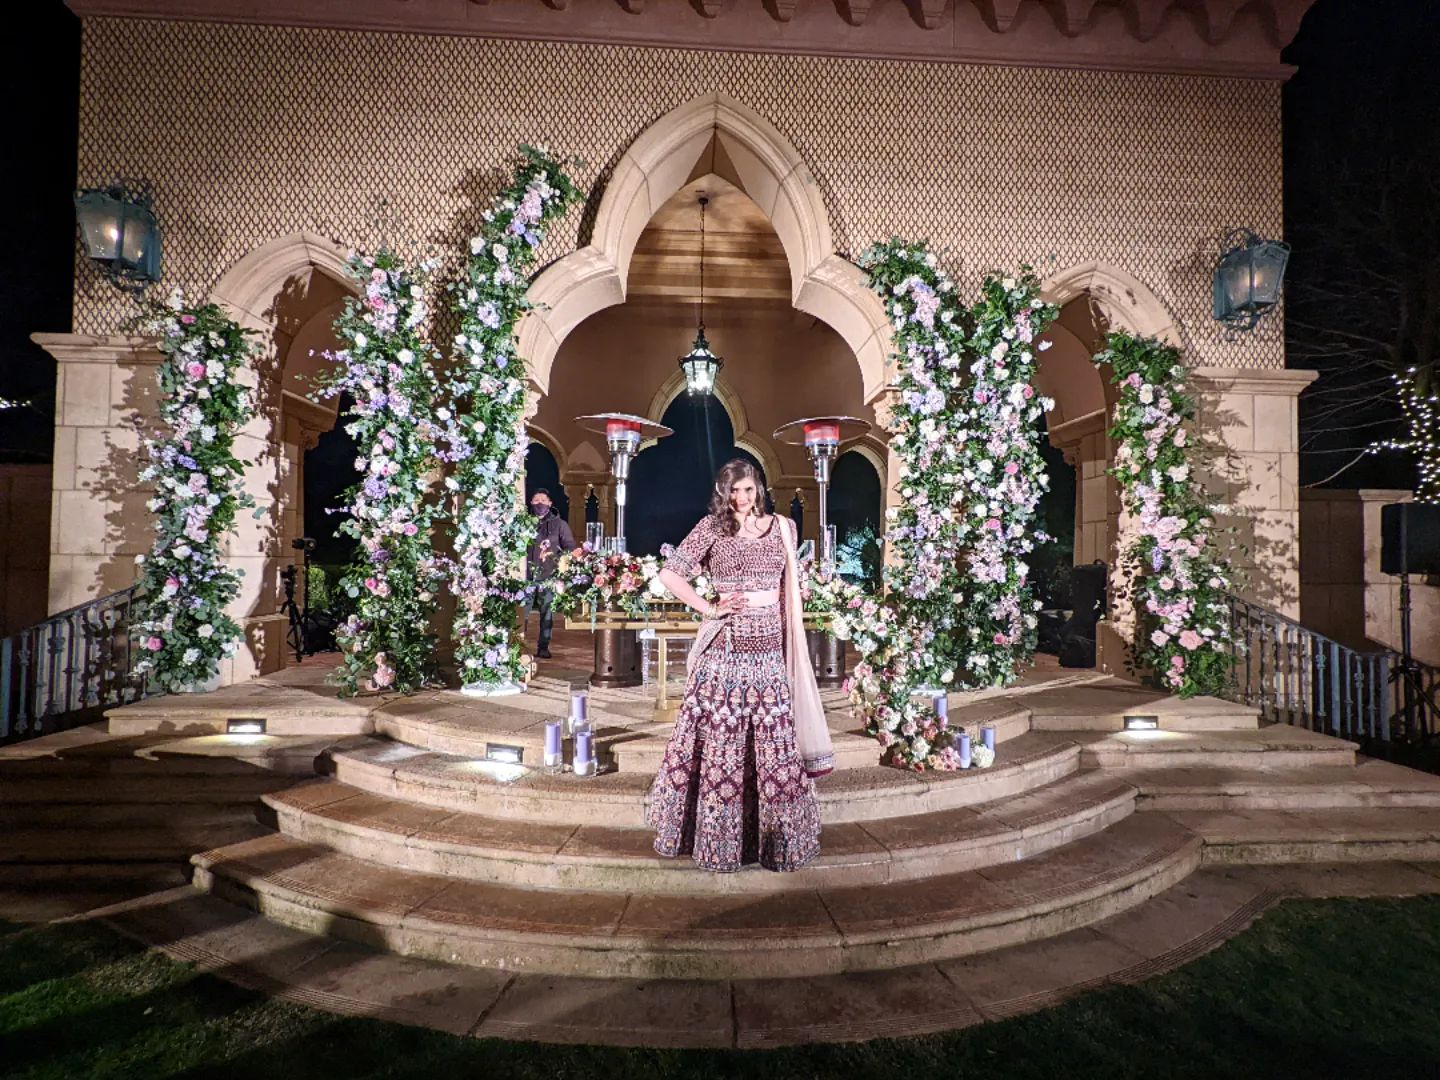 The #diltopulakantihai wedding was literally one of the most magnificent things I've ever seen.